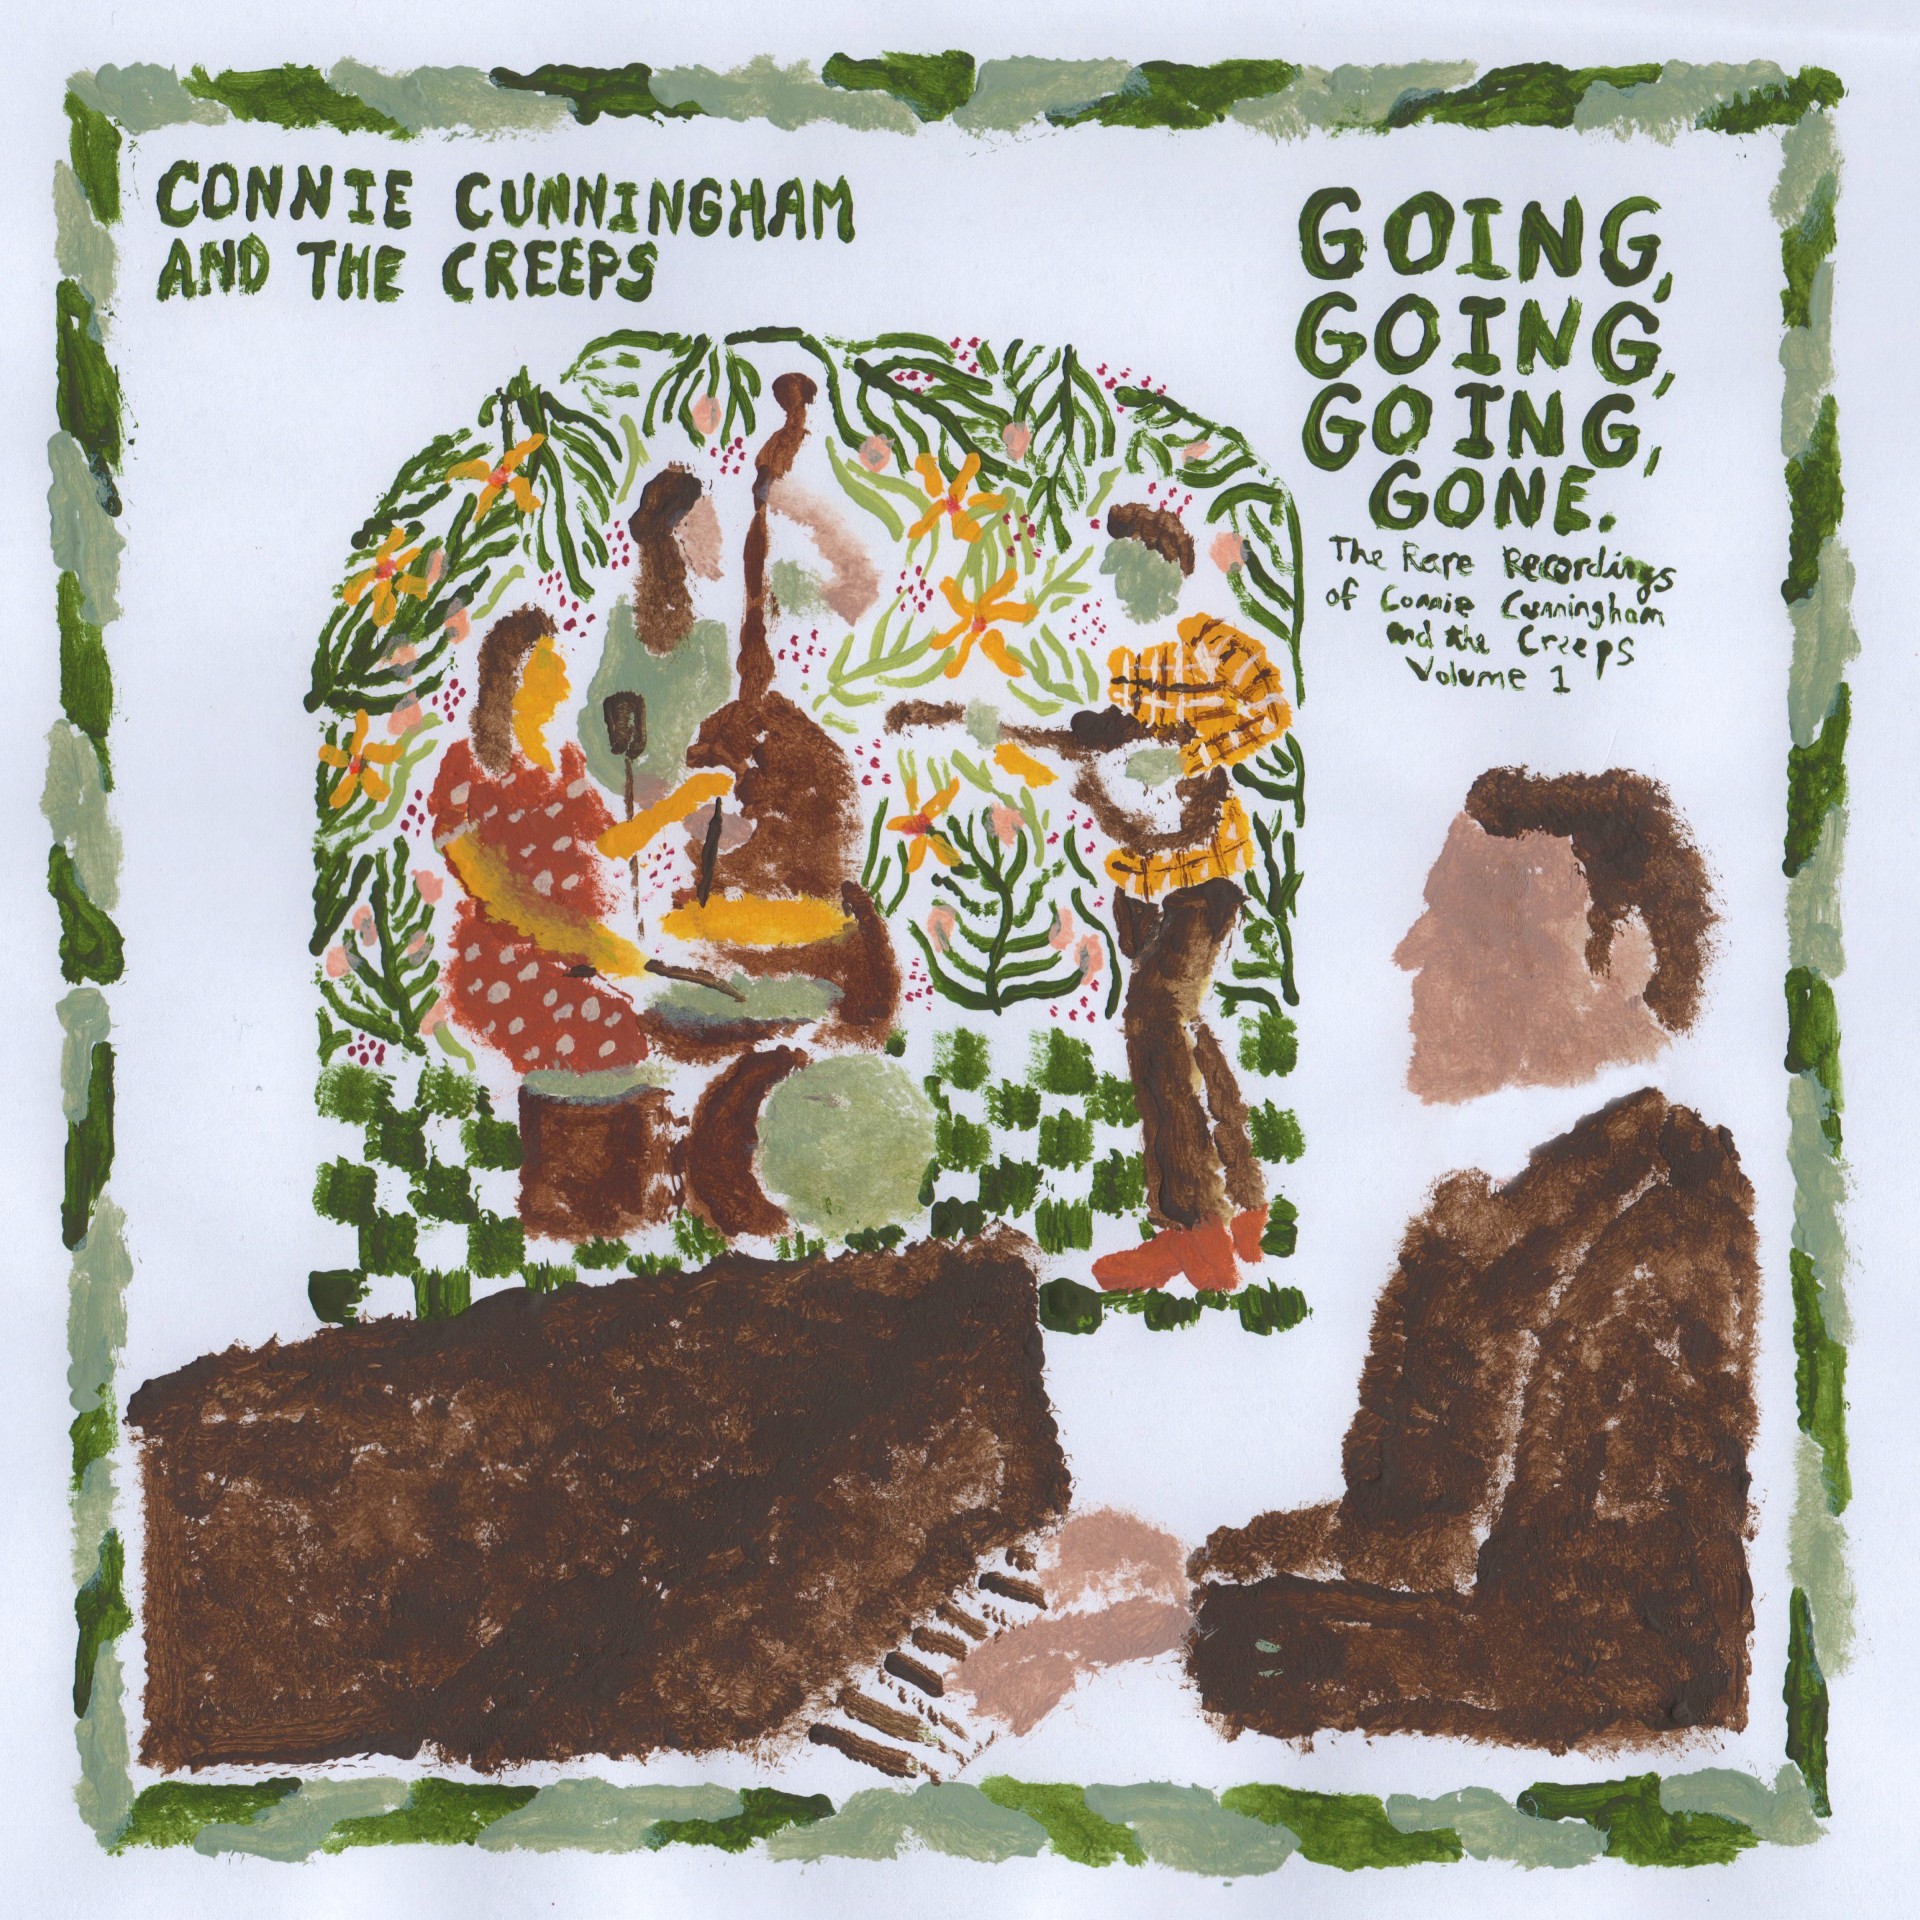 Artwork for the single “Going Going, Going, Gone” by Connie Cunningham and the Creeps